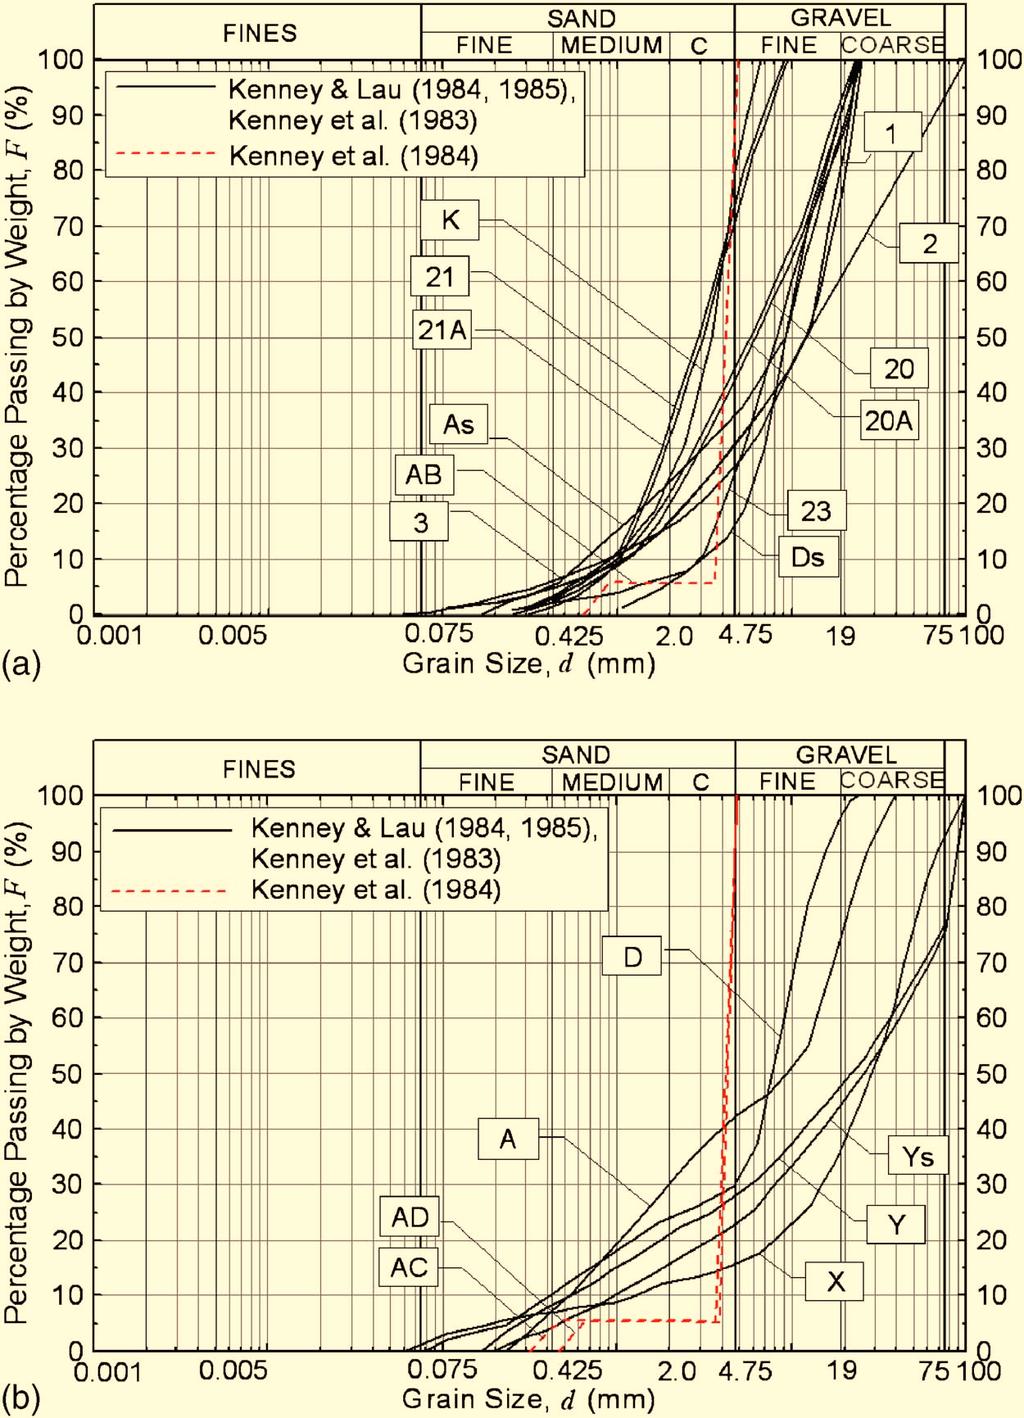 Fig. 3. Soil samples tested by Kenney and Lau 1984, 1985 and Kenney et al.